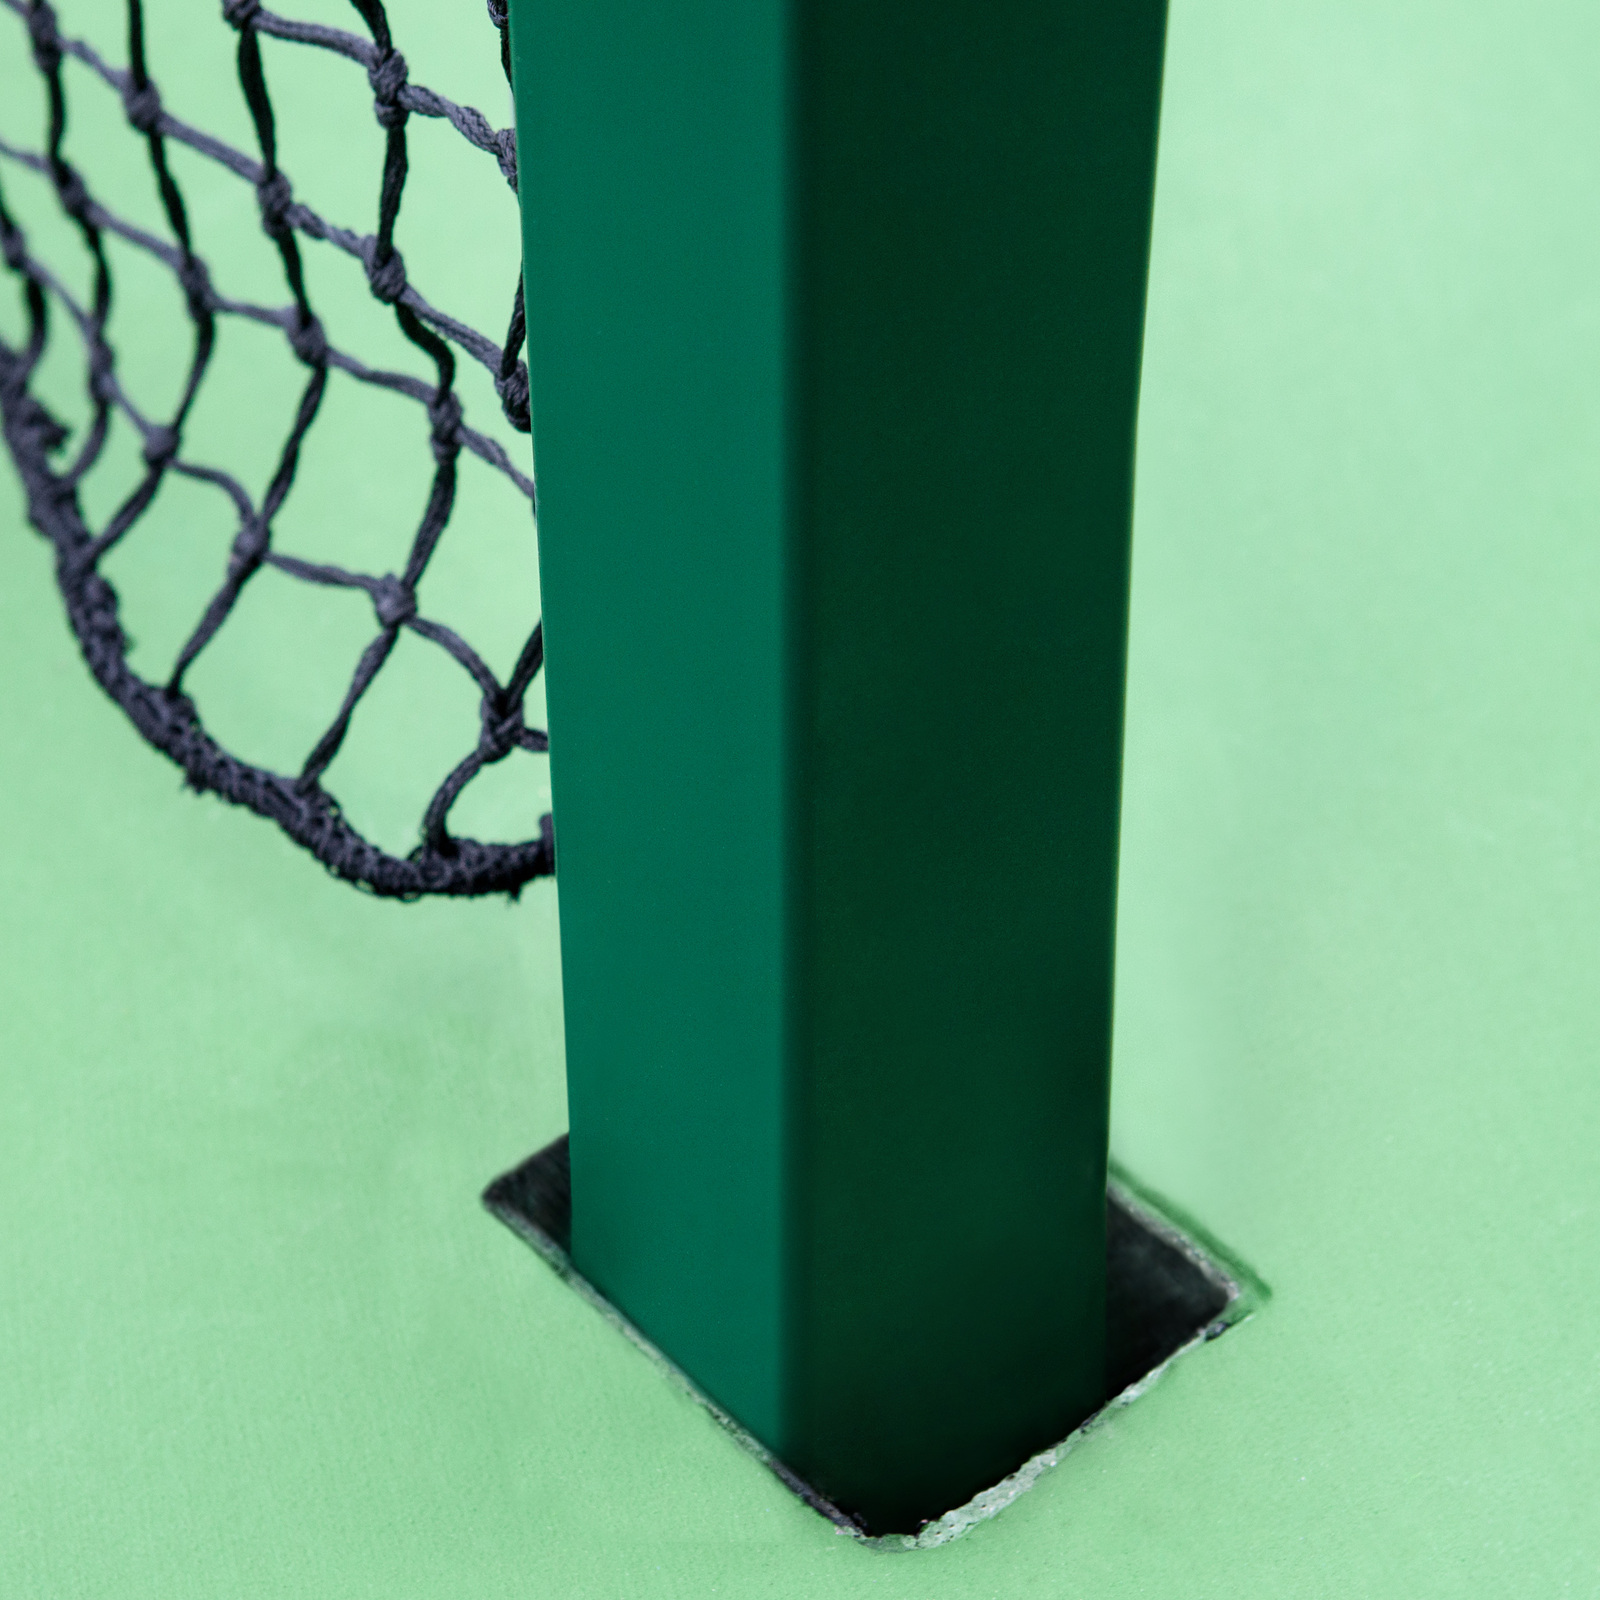 VERMONT SQUARE TENNIS POSTS [Ground Sockets Type:: With Ground Sockets]